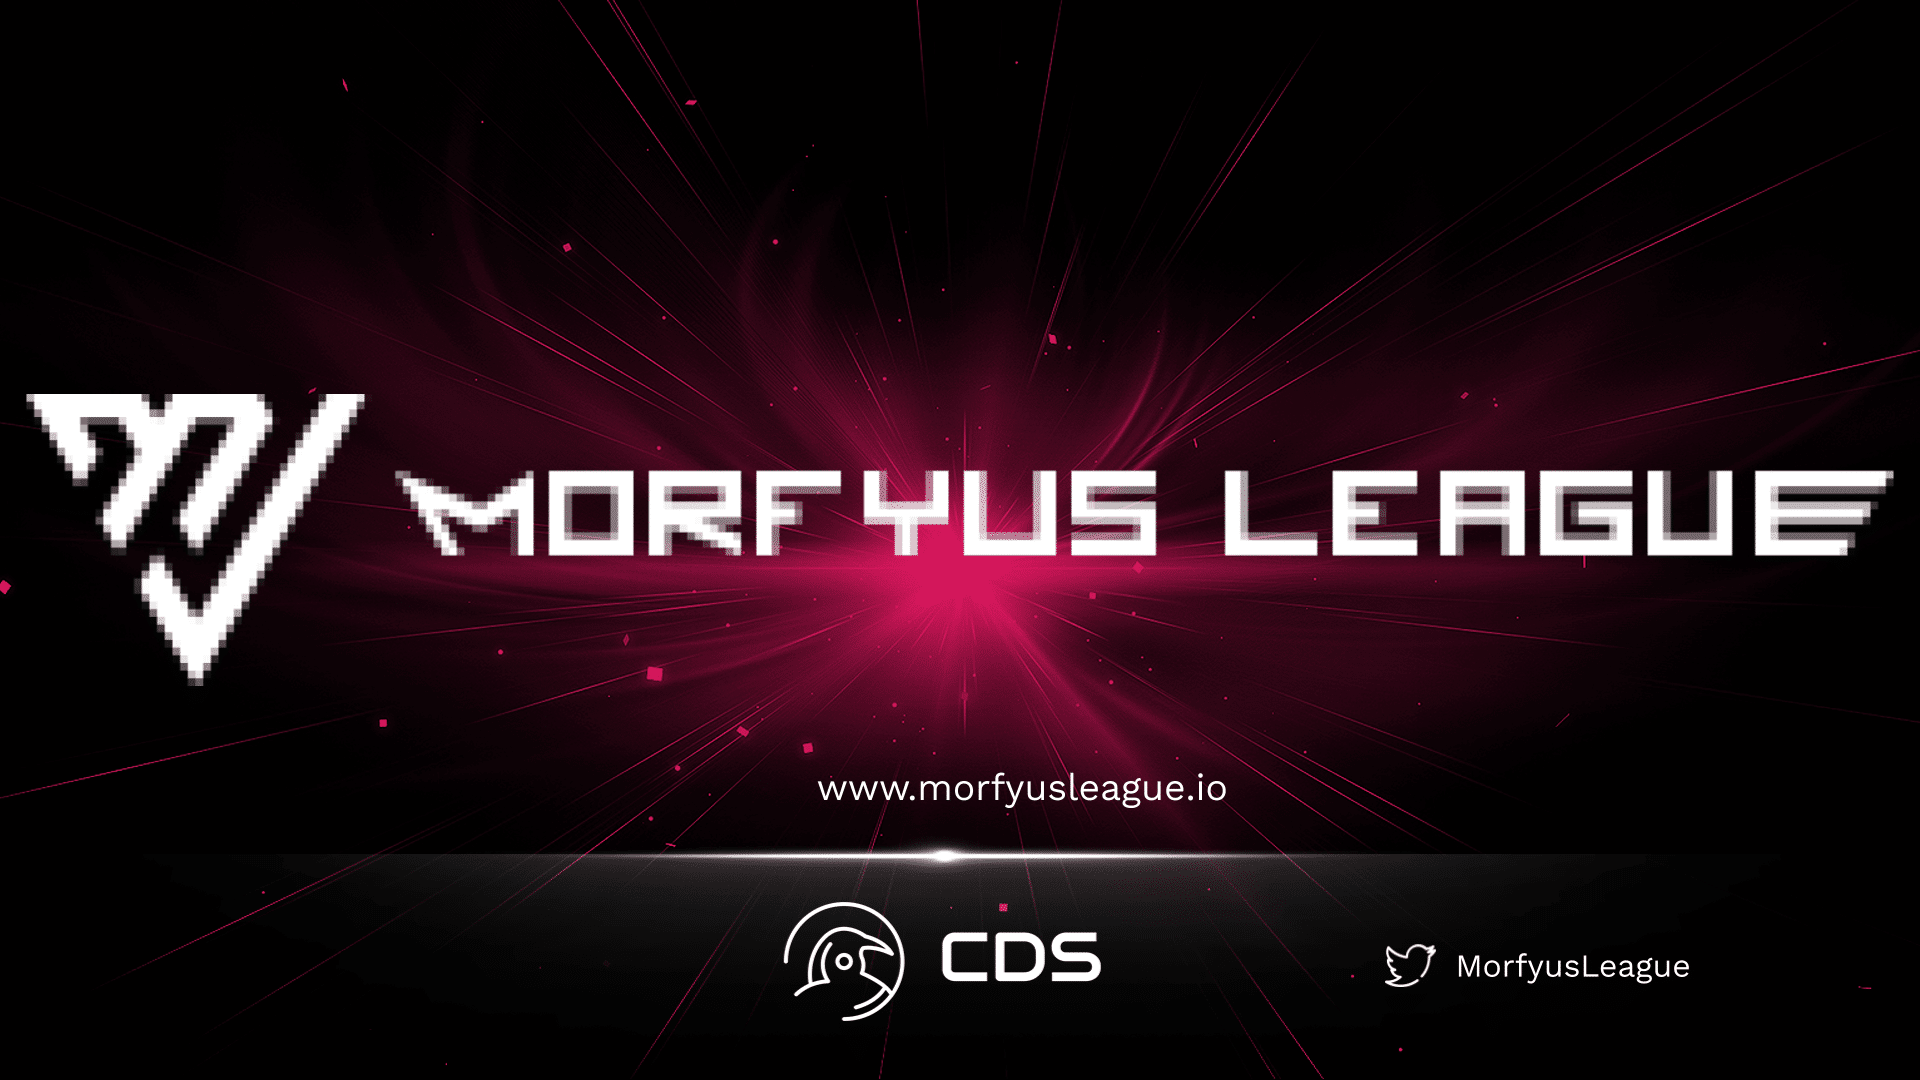 What is Morfyus League